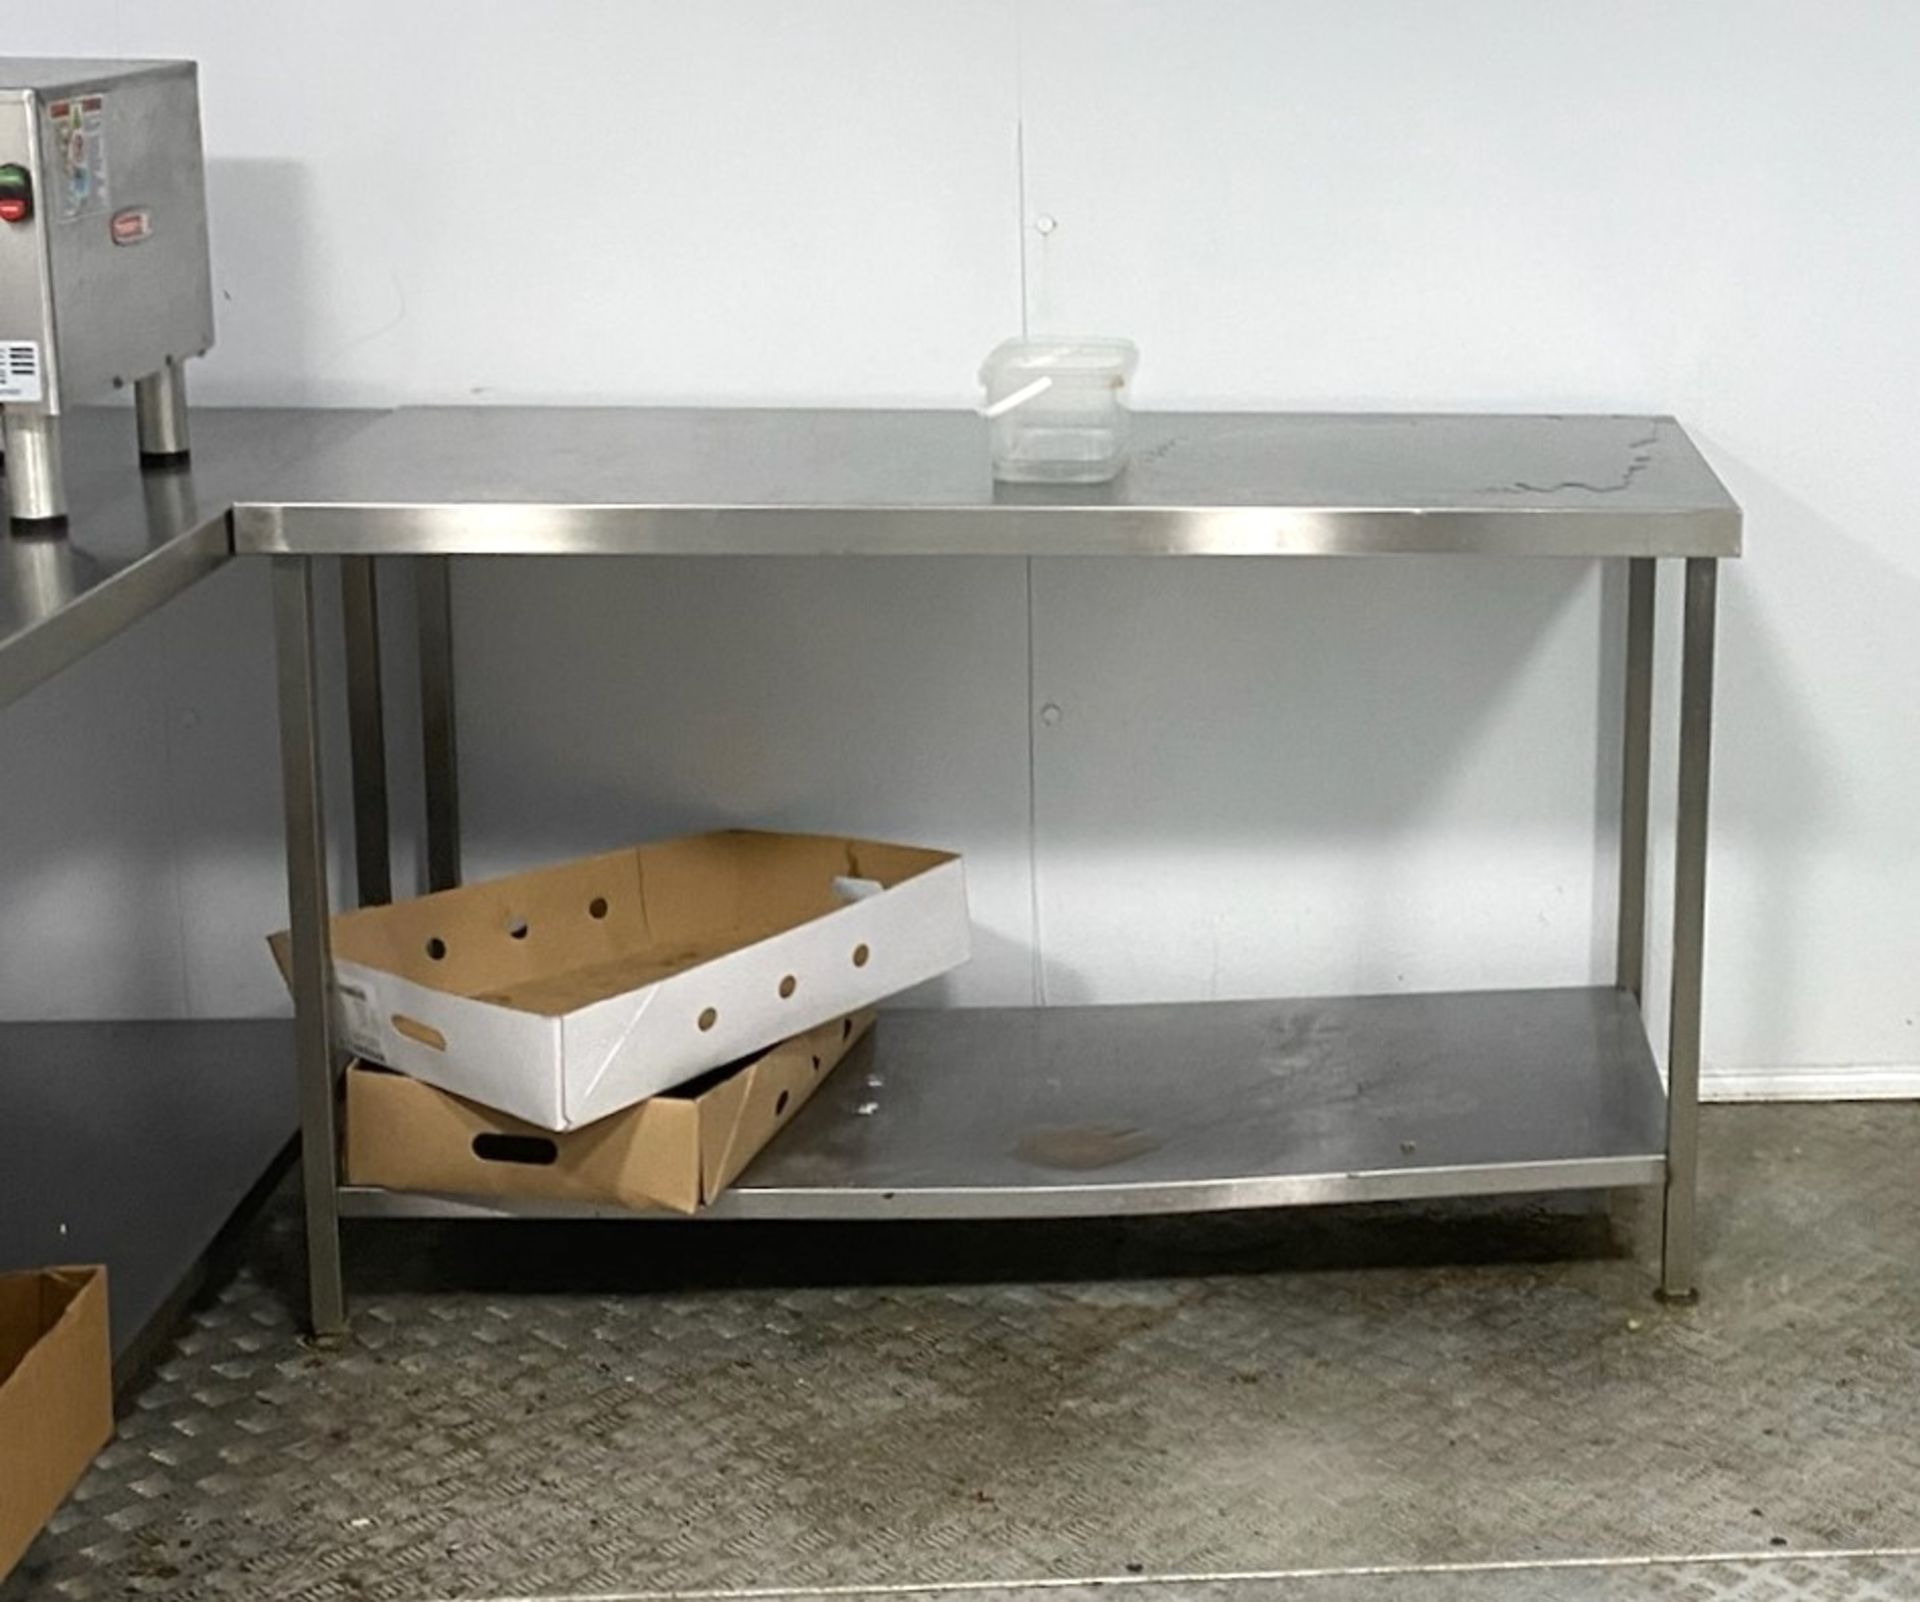 1 x Stainless Steel Prep Table With Undershelf